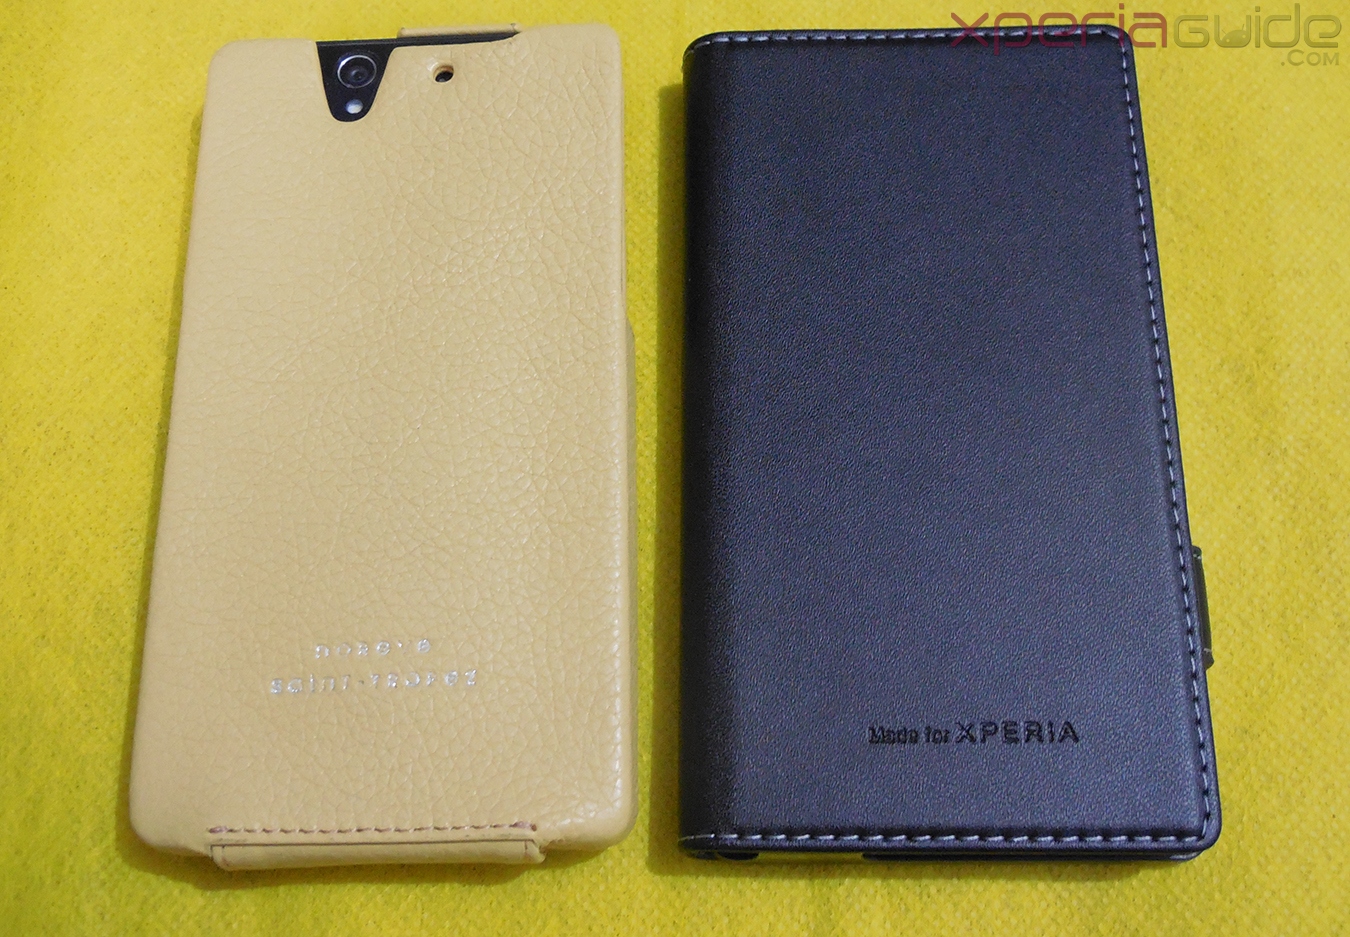 Xperia Z and Xperia SP Leather Case by Noreve - Comparisons